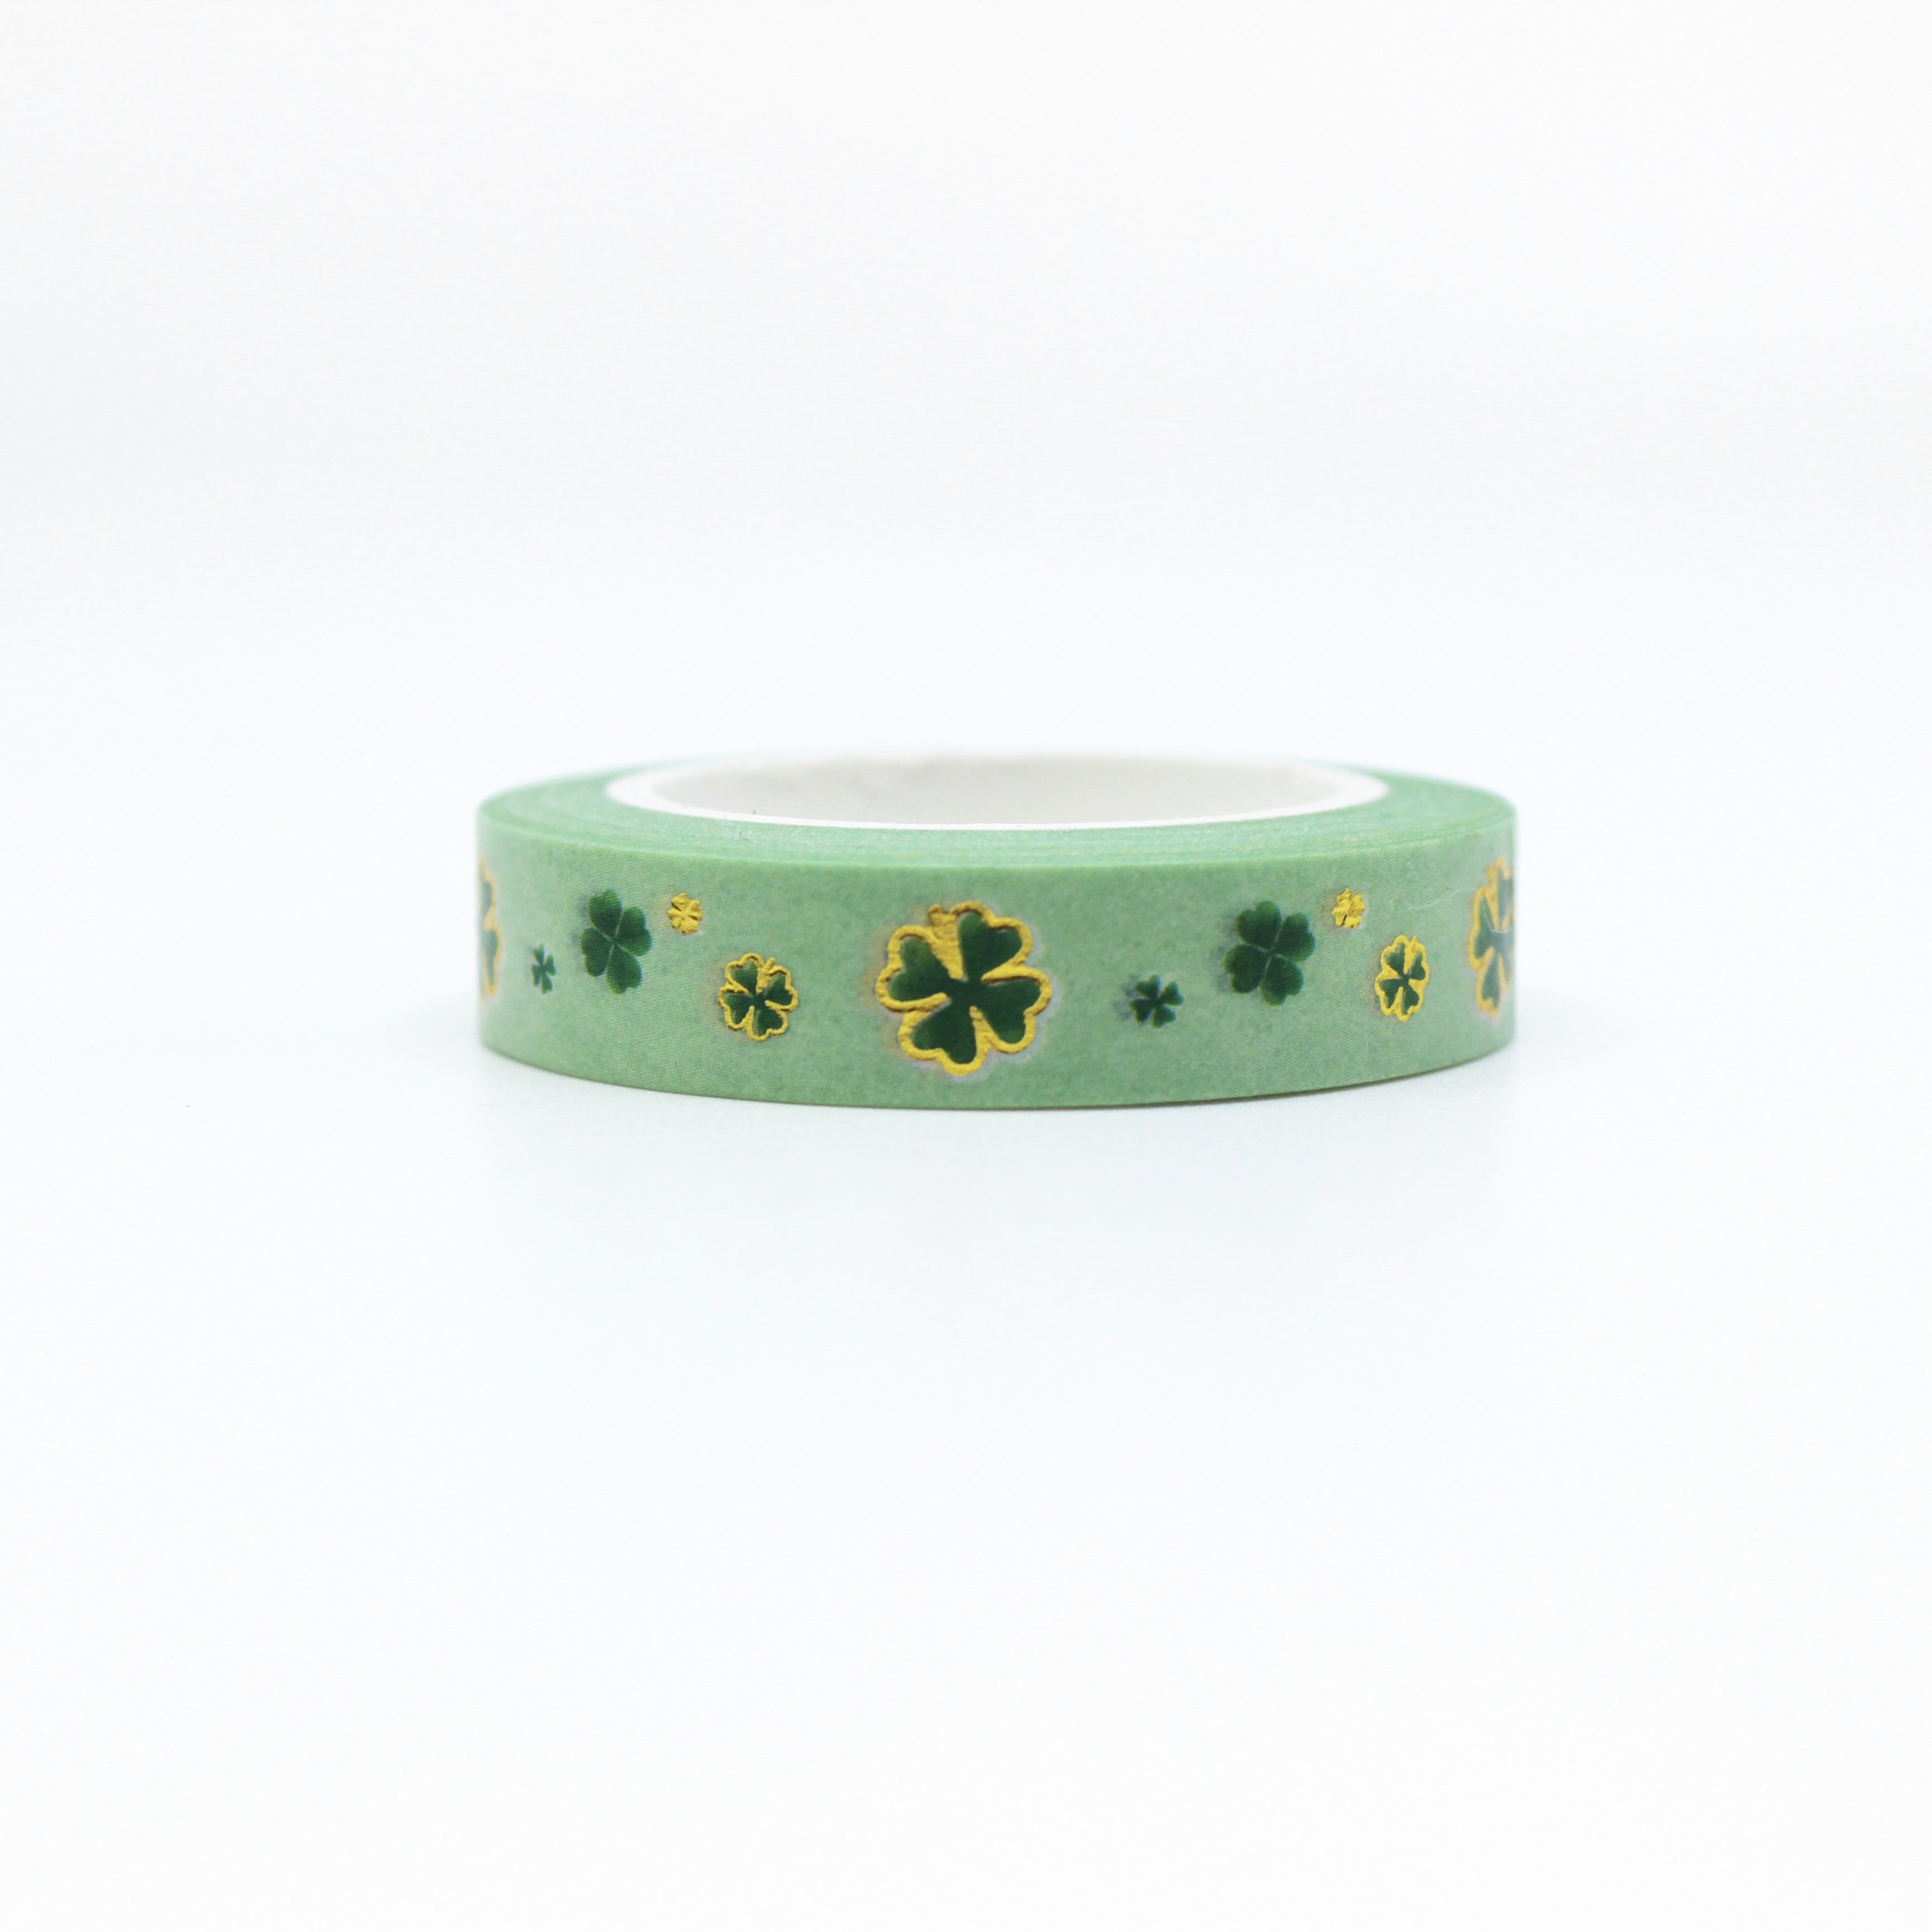 Green & Gold Foil Clover Washi Tape: Celebrate St. Patrick's Day or add a touch of luck to your projects with this charming washi tape featuring a pattern of green clovers accented with gold foil. Ideal for crafts, cards, and decor. This tape is sold at BBB Supplies craft Shop.